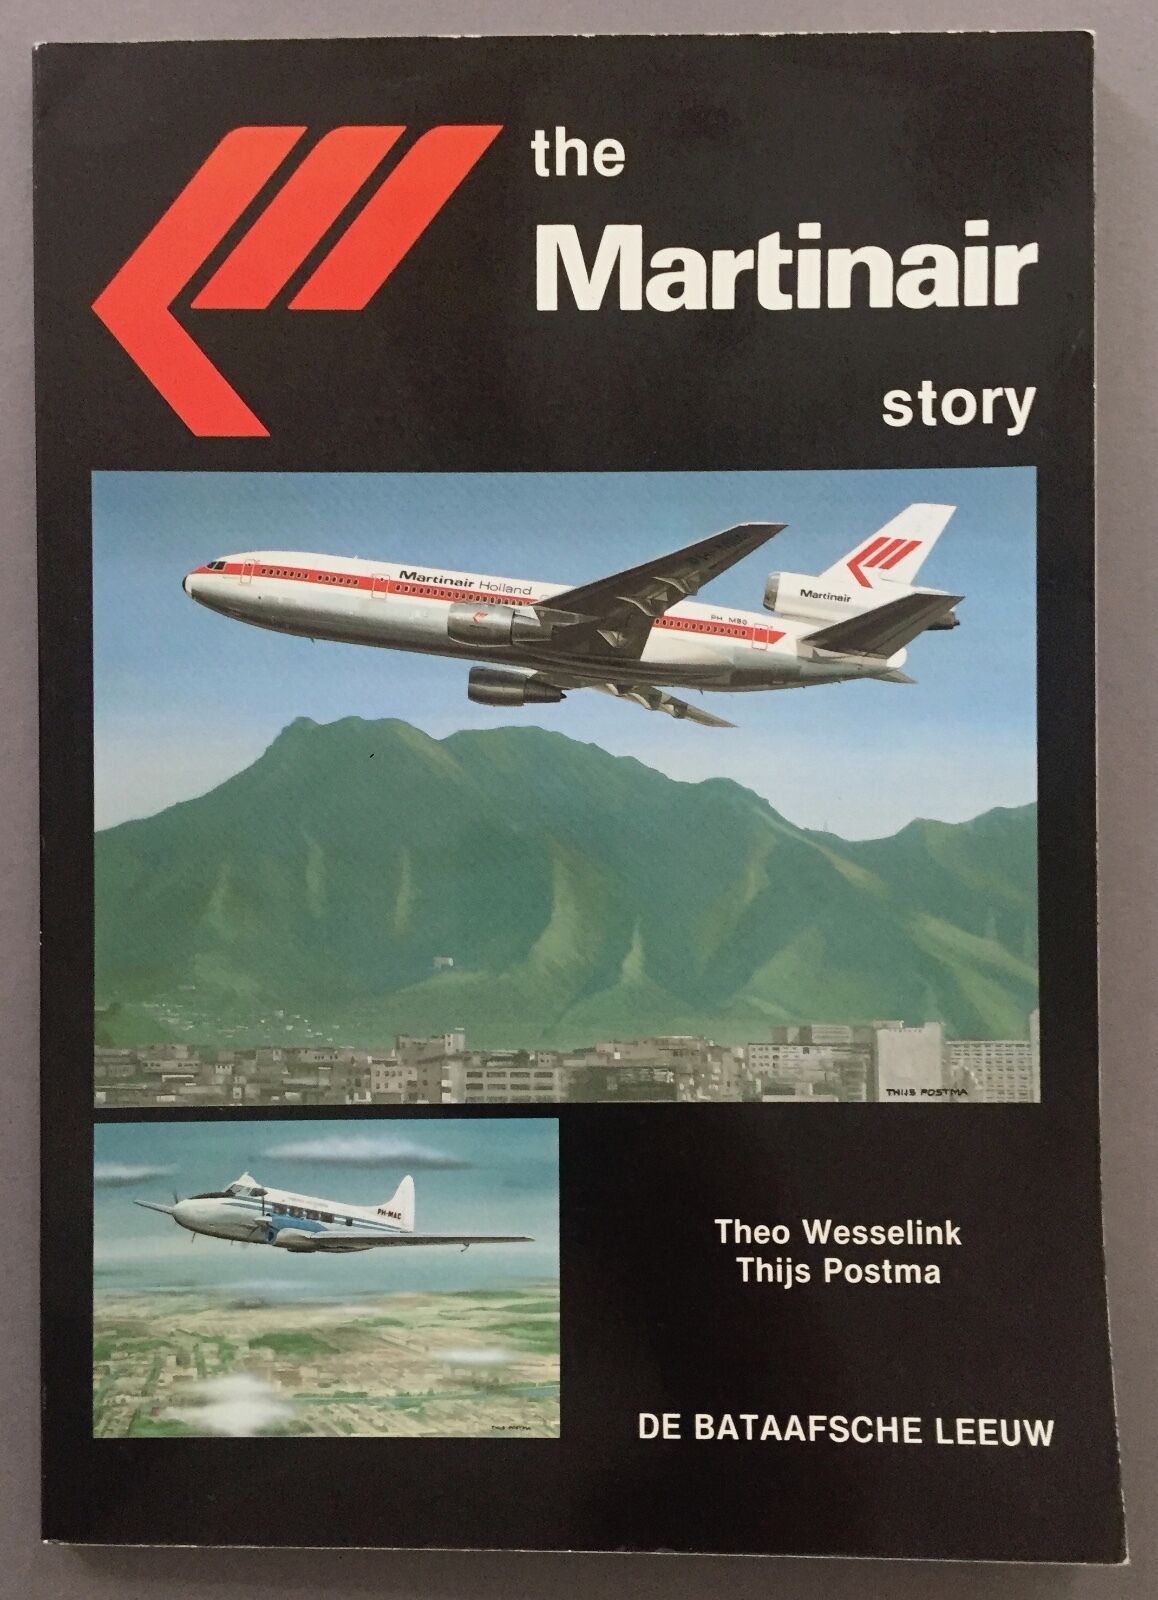 THE MARTINAIR STORY BOOK 1983 SUPERB PICTURES THIJS POSTMA THEO WESSELINK 